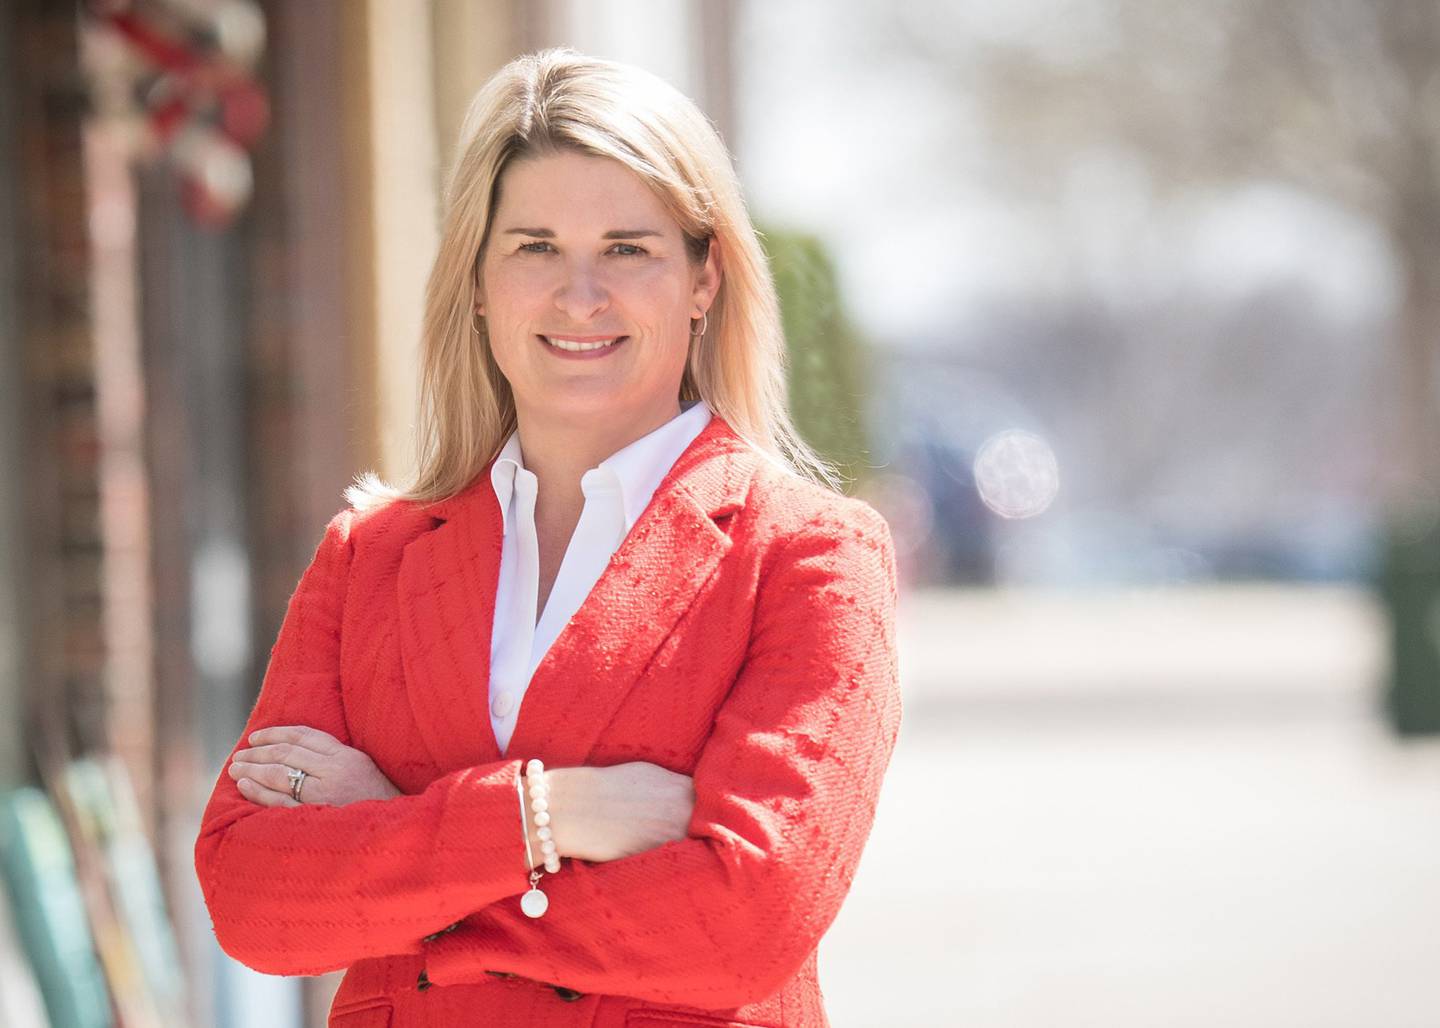 Regan Deering is running as the Republican candidate for the 13th District Congressional seat in central Illinois.